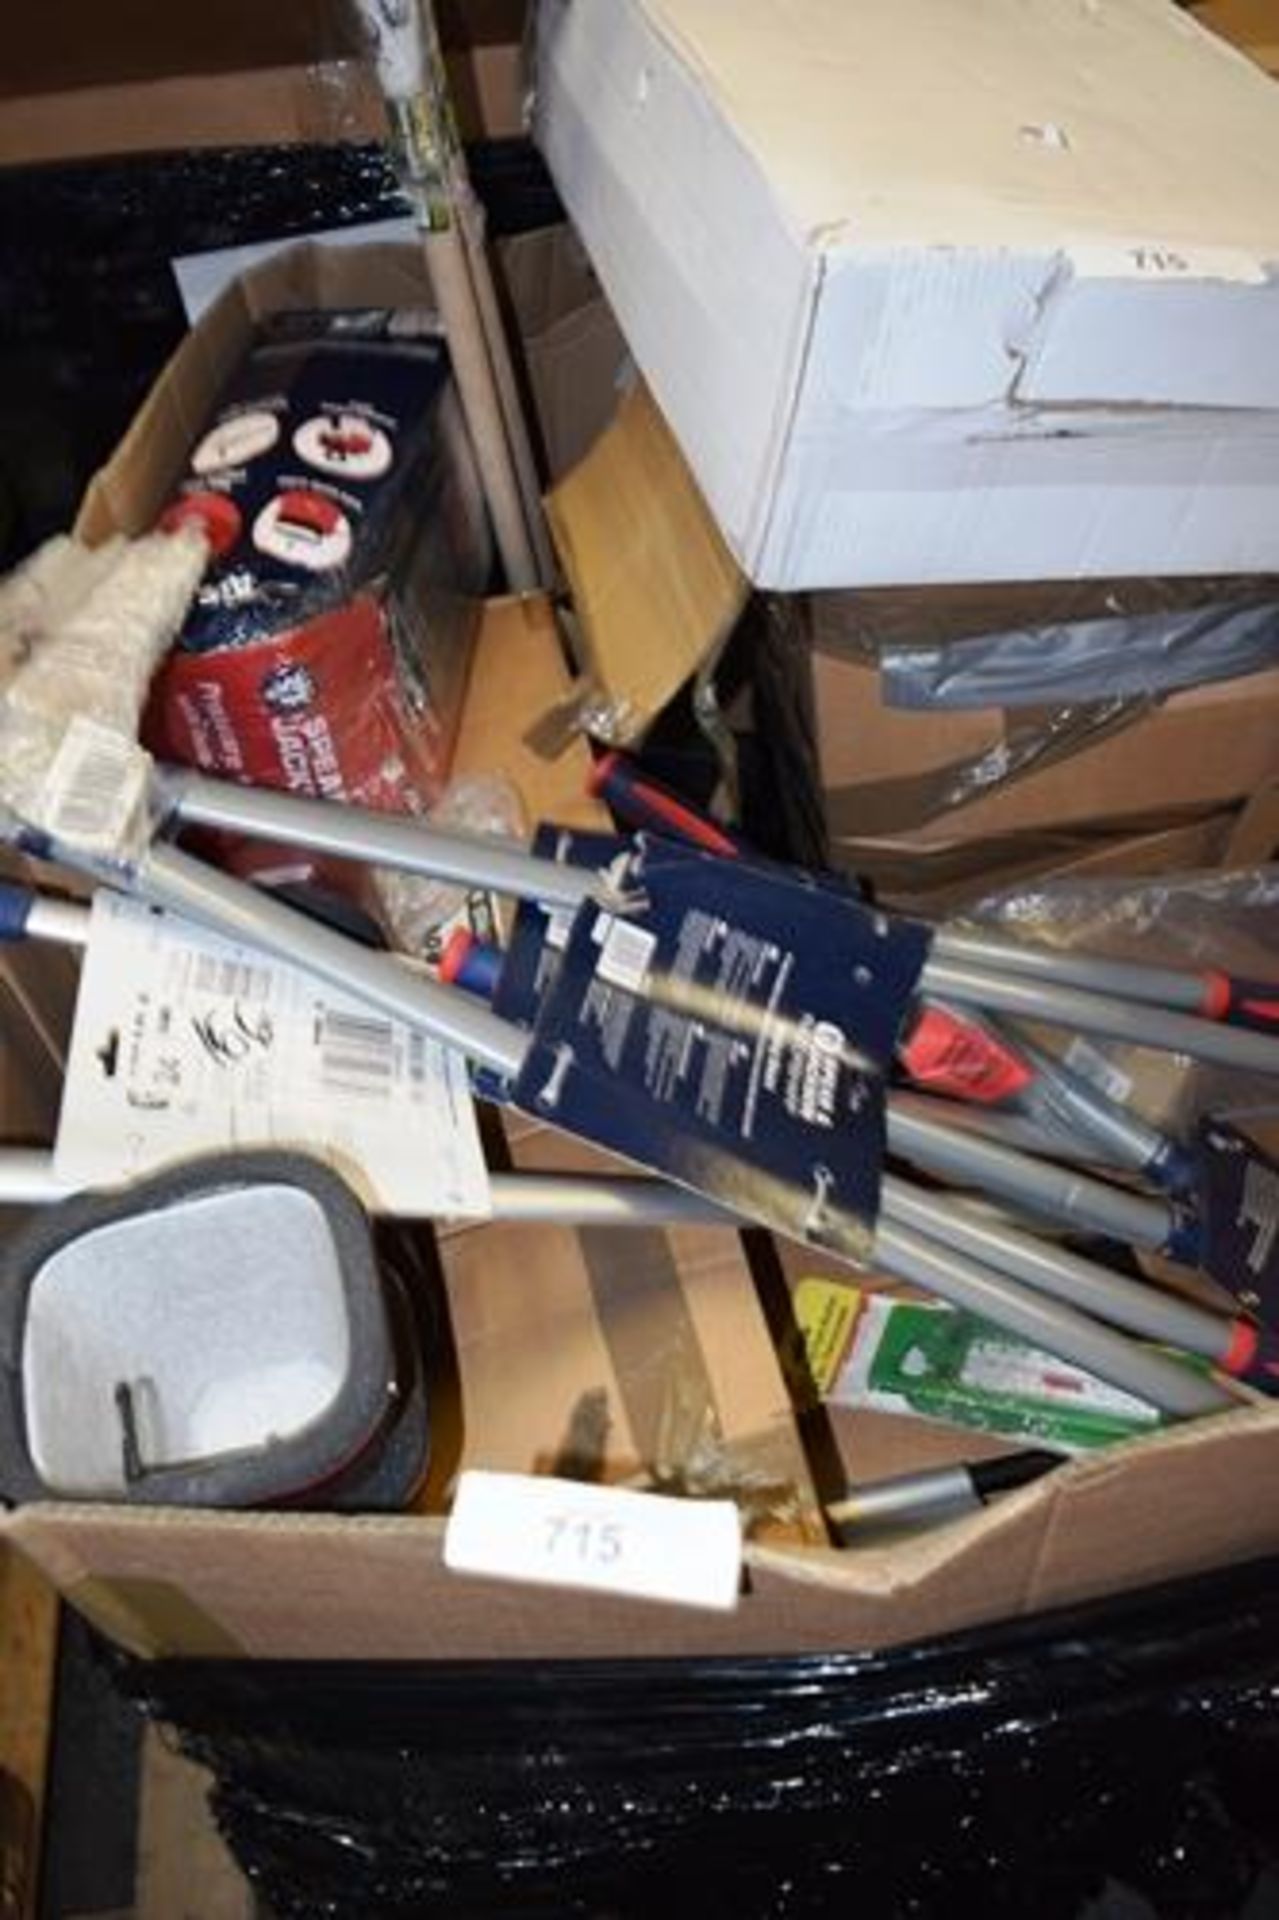 A pallet of assorted gardening equipment including wheel barrows, oscillating sprinkler tap covers